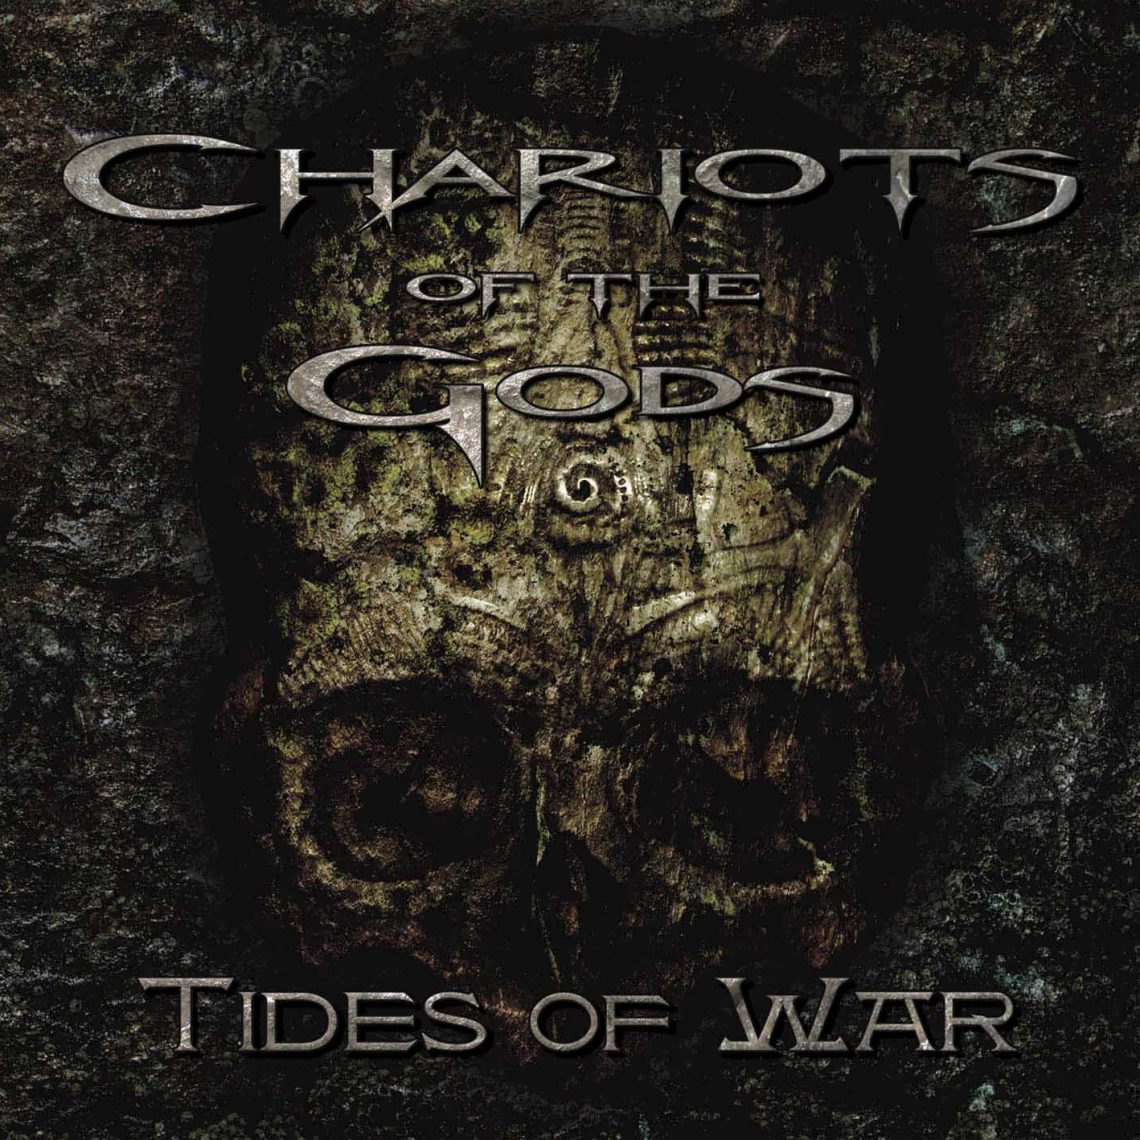 CHARIOTS OF THE GODS Comment On Departure of Vocalist and Drummer